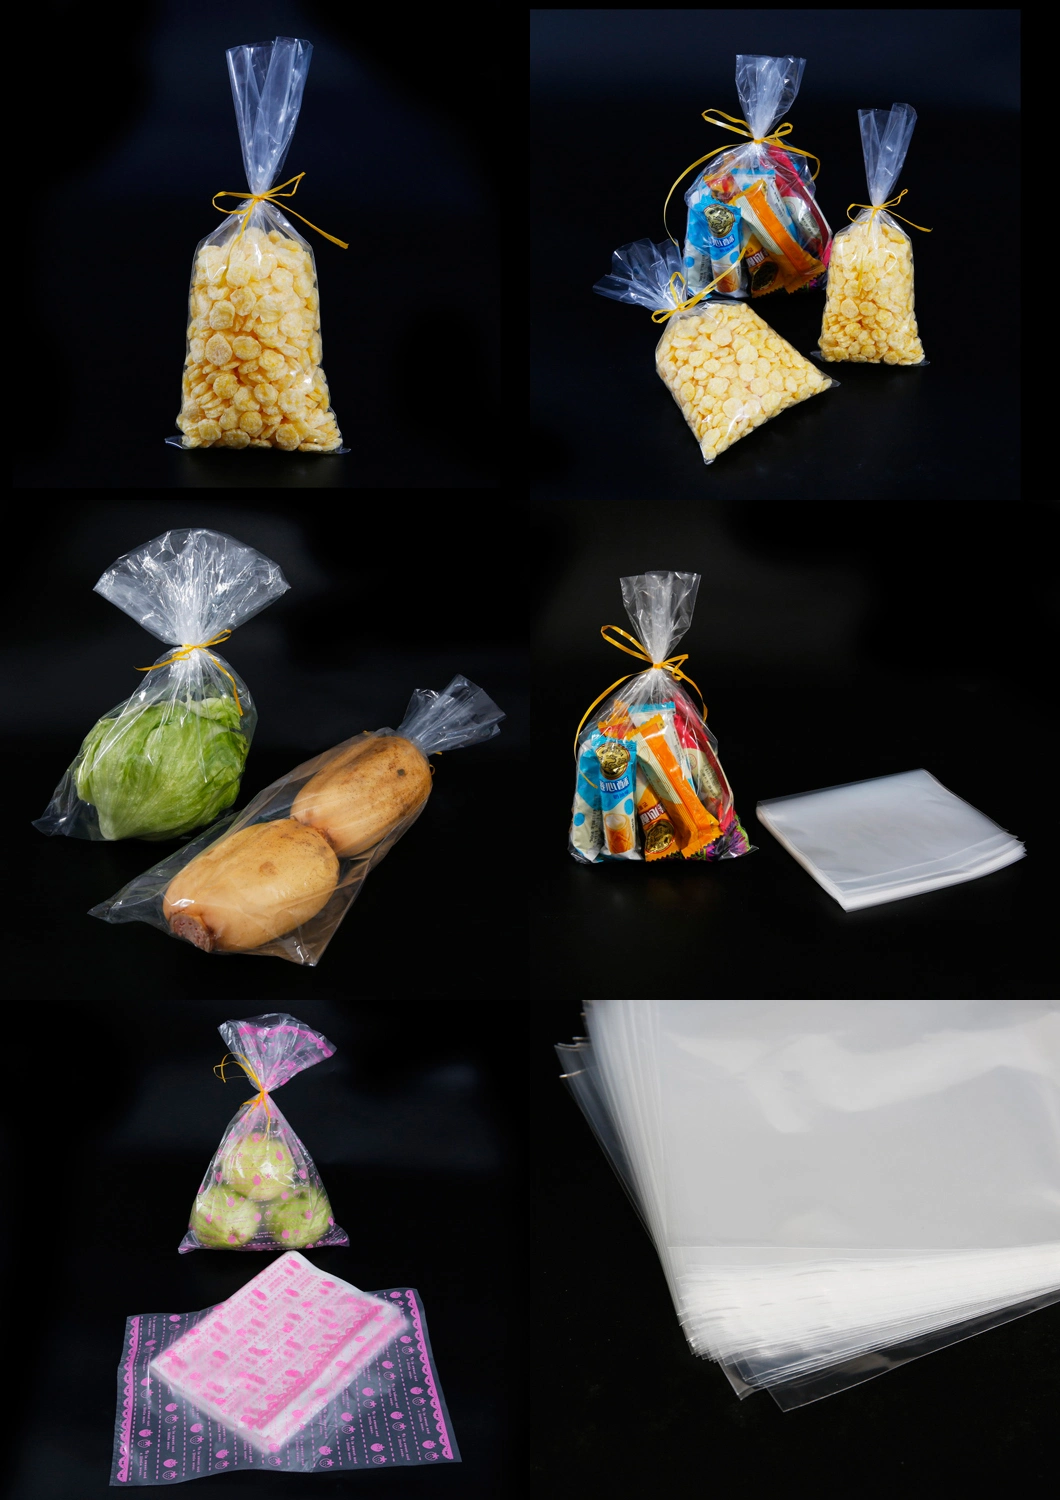 Resealable Transparentclear Plastic Grocery Bag Pouch LDPE Plastic Bag for Sealing